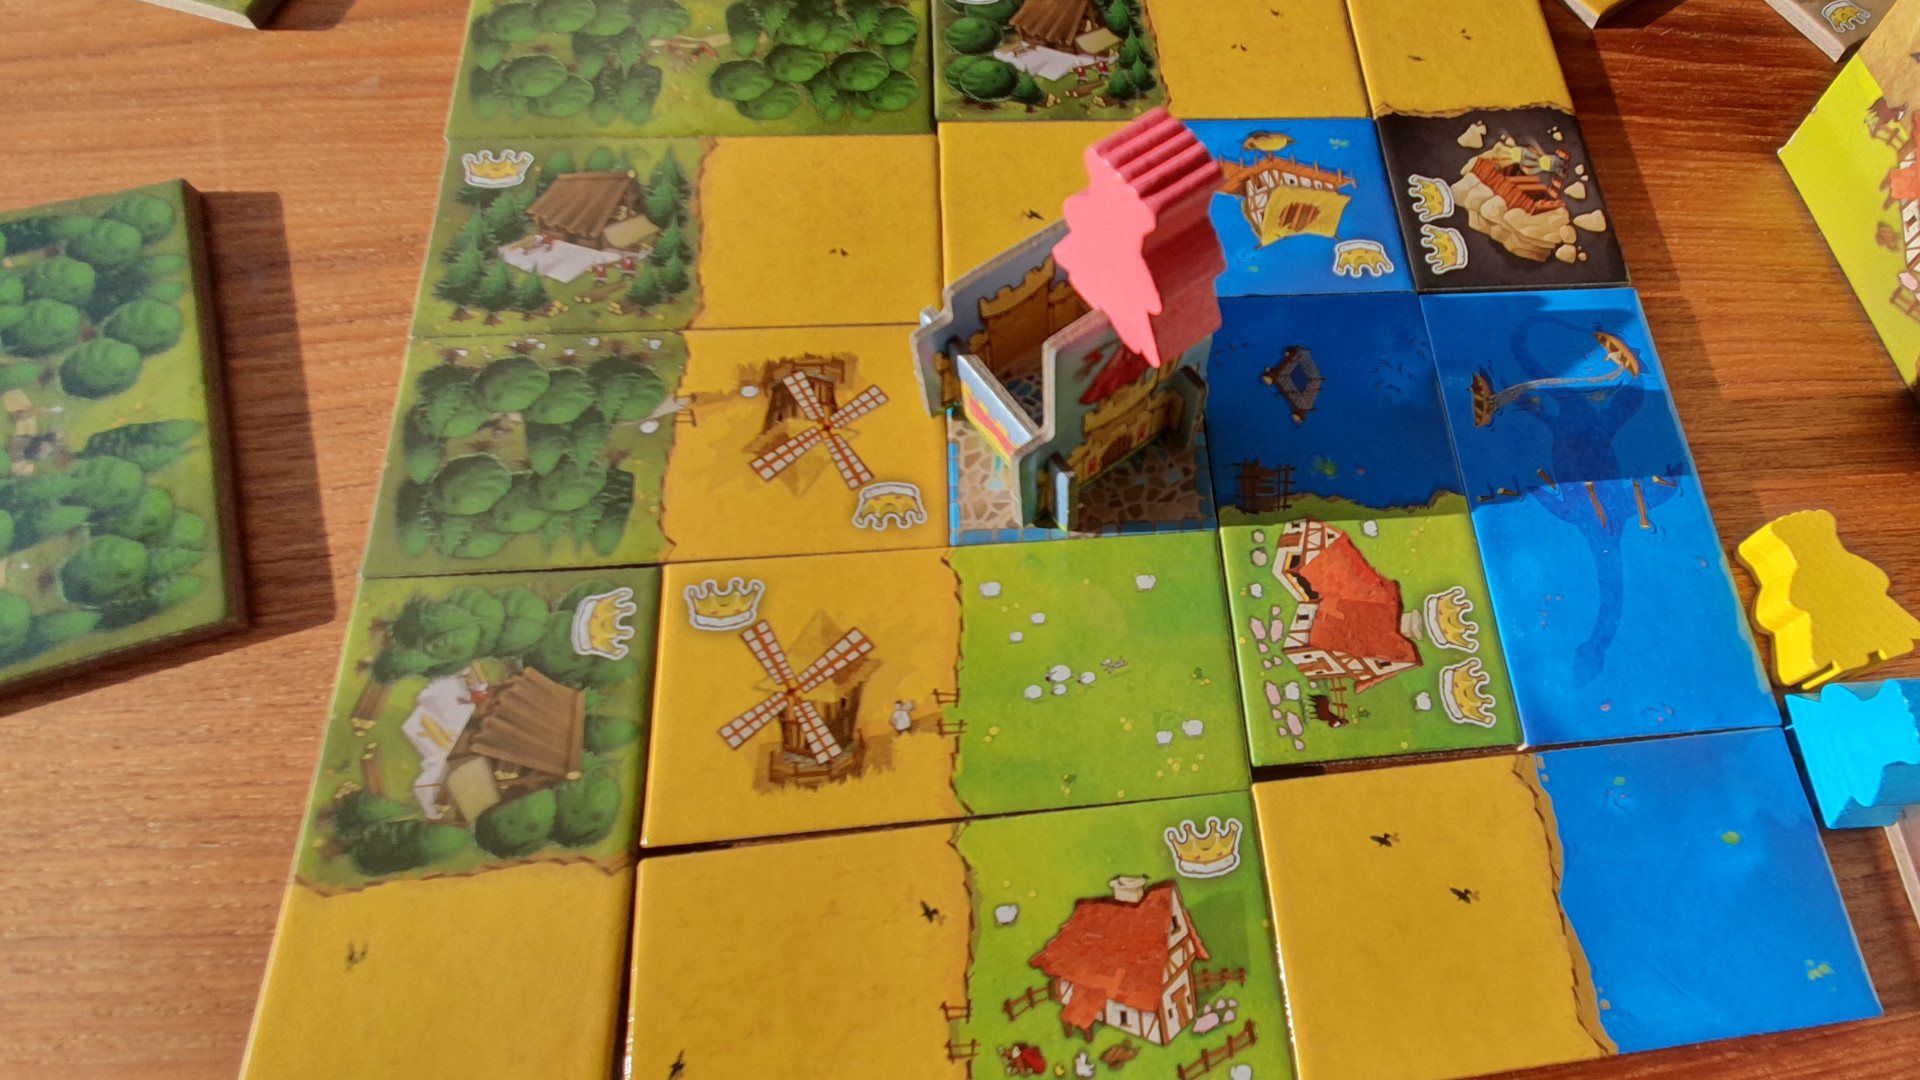 Tiles and a meeple from Kingdomino, one of the best gateeway games